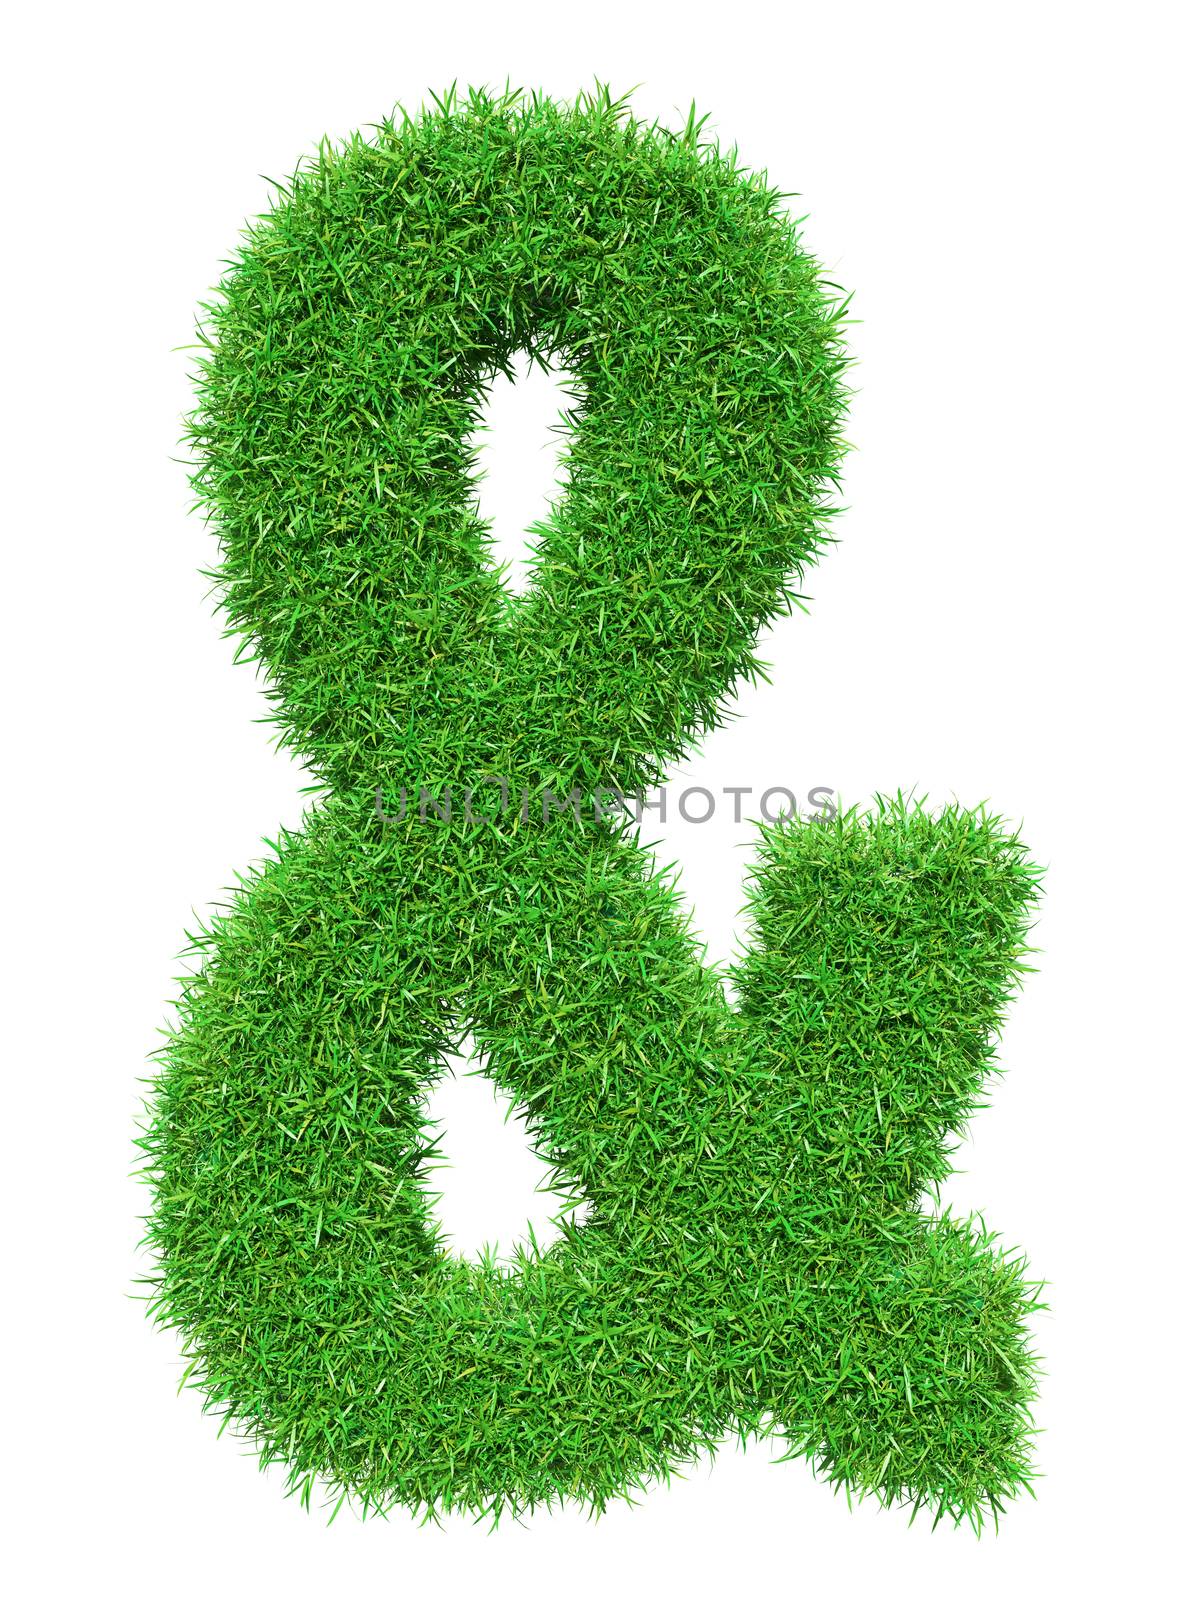 Green grass ampersand, isolated on white background. 3D illustration